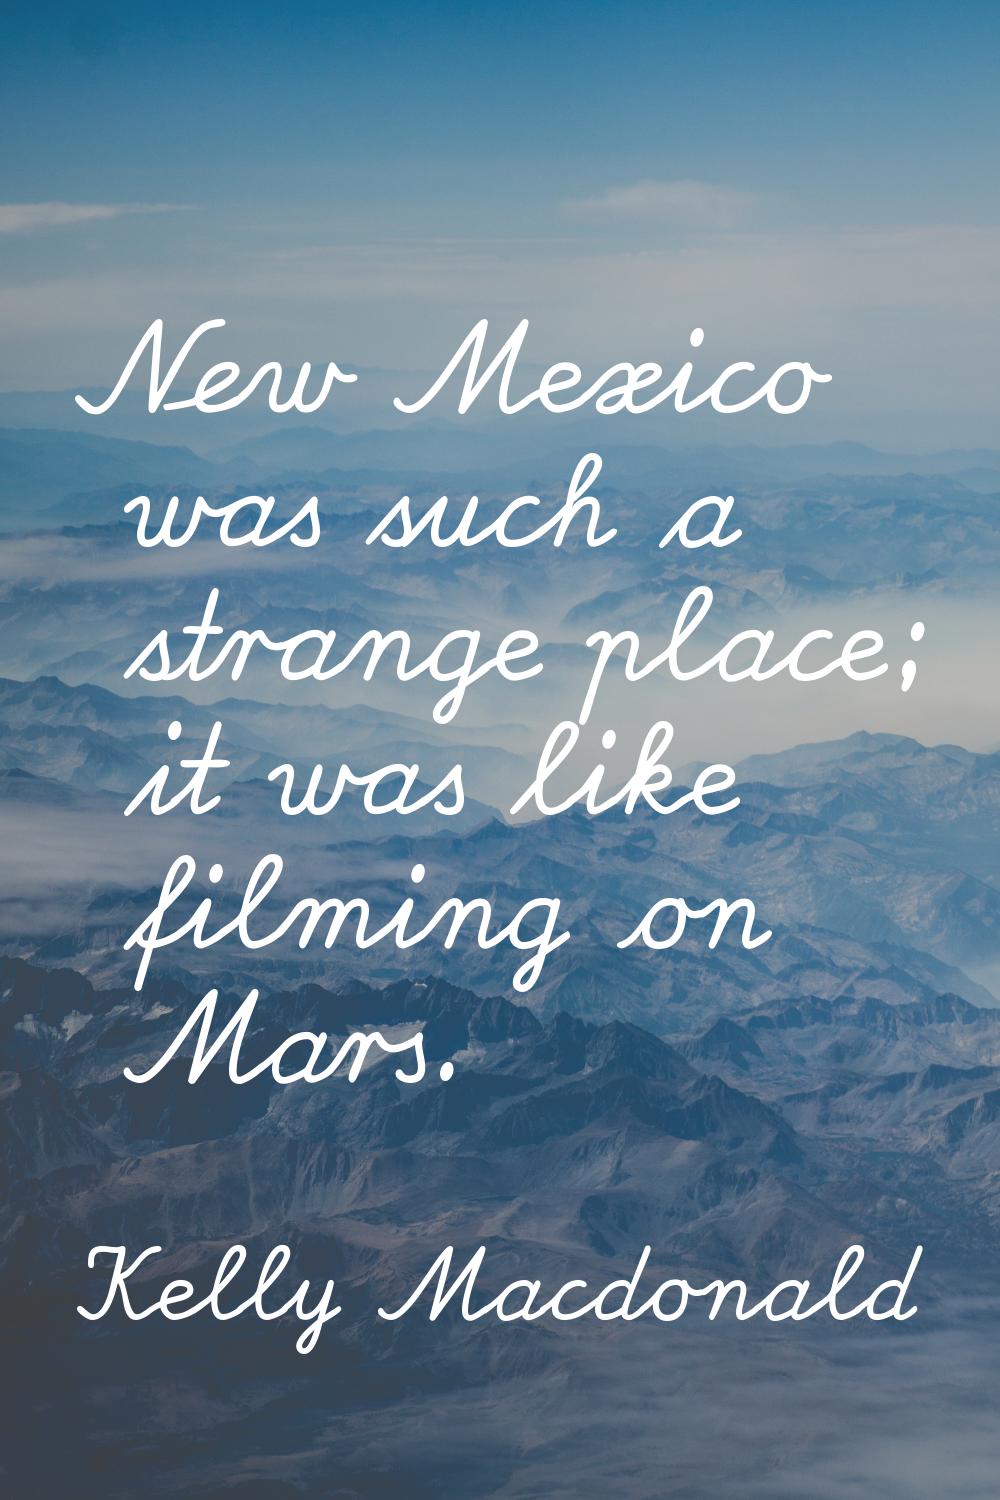 New Mexico was such a strange place; it was like filming on Mars.